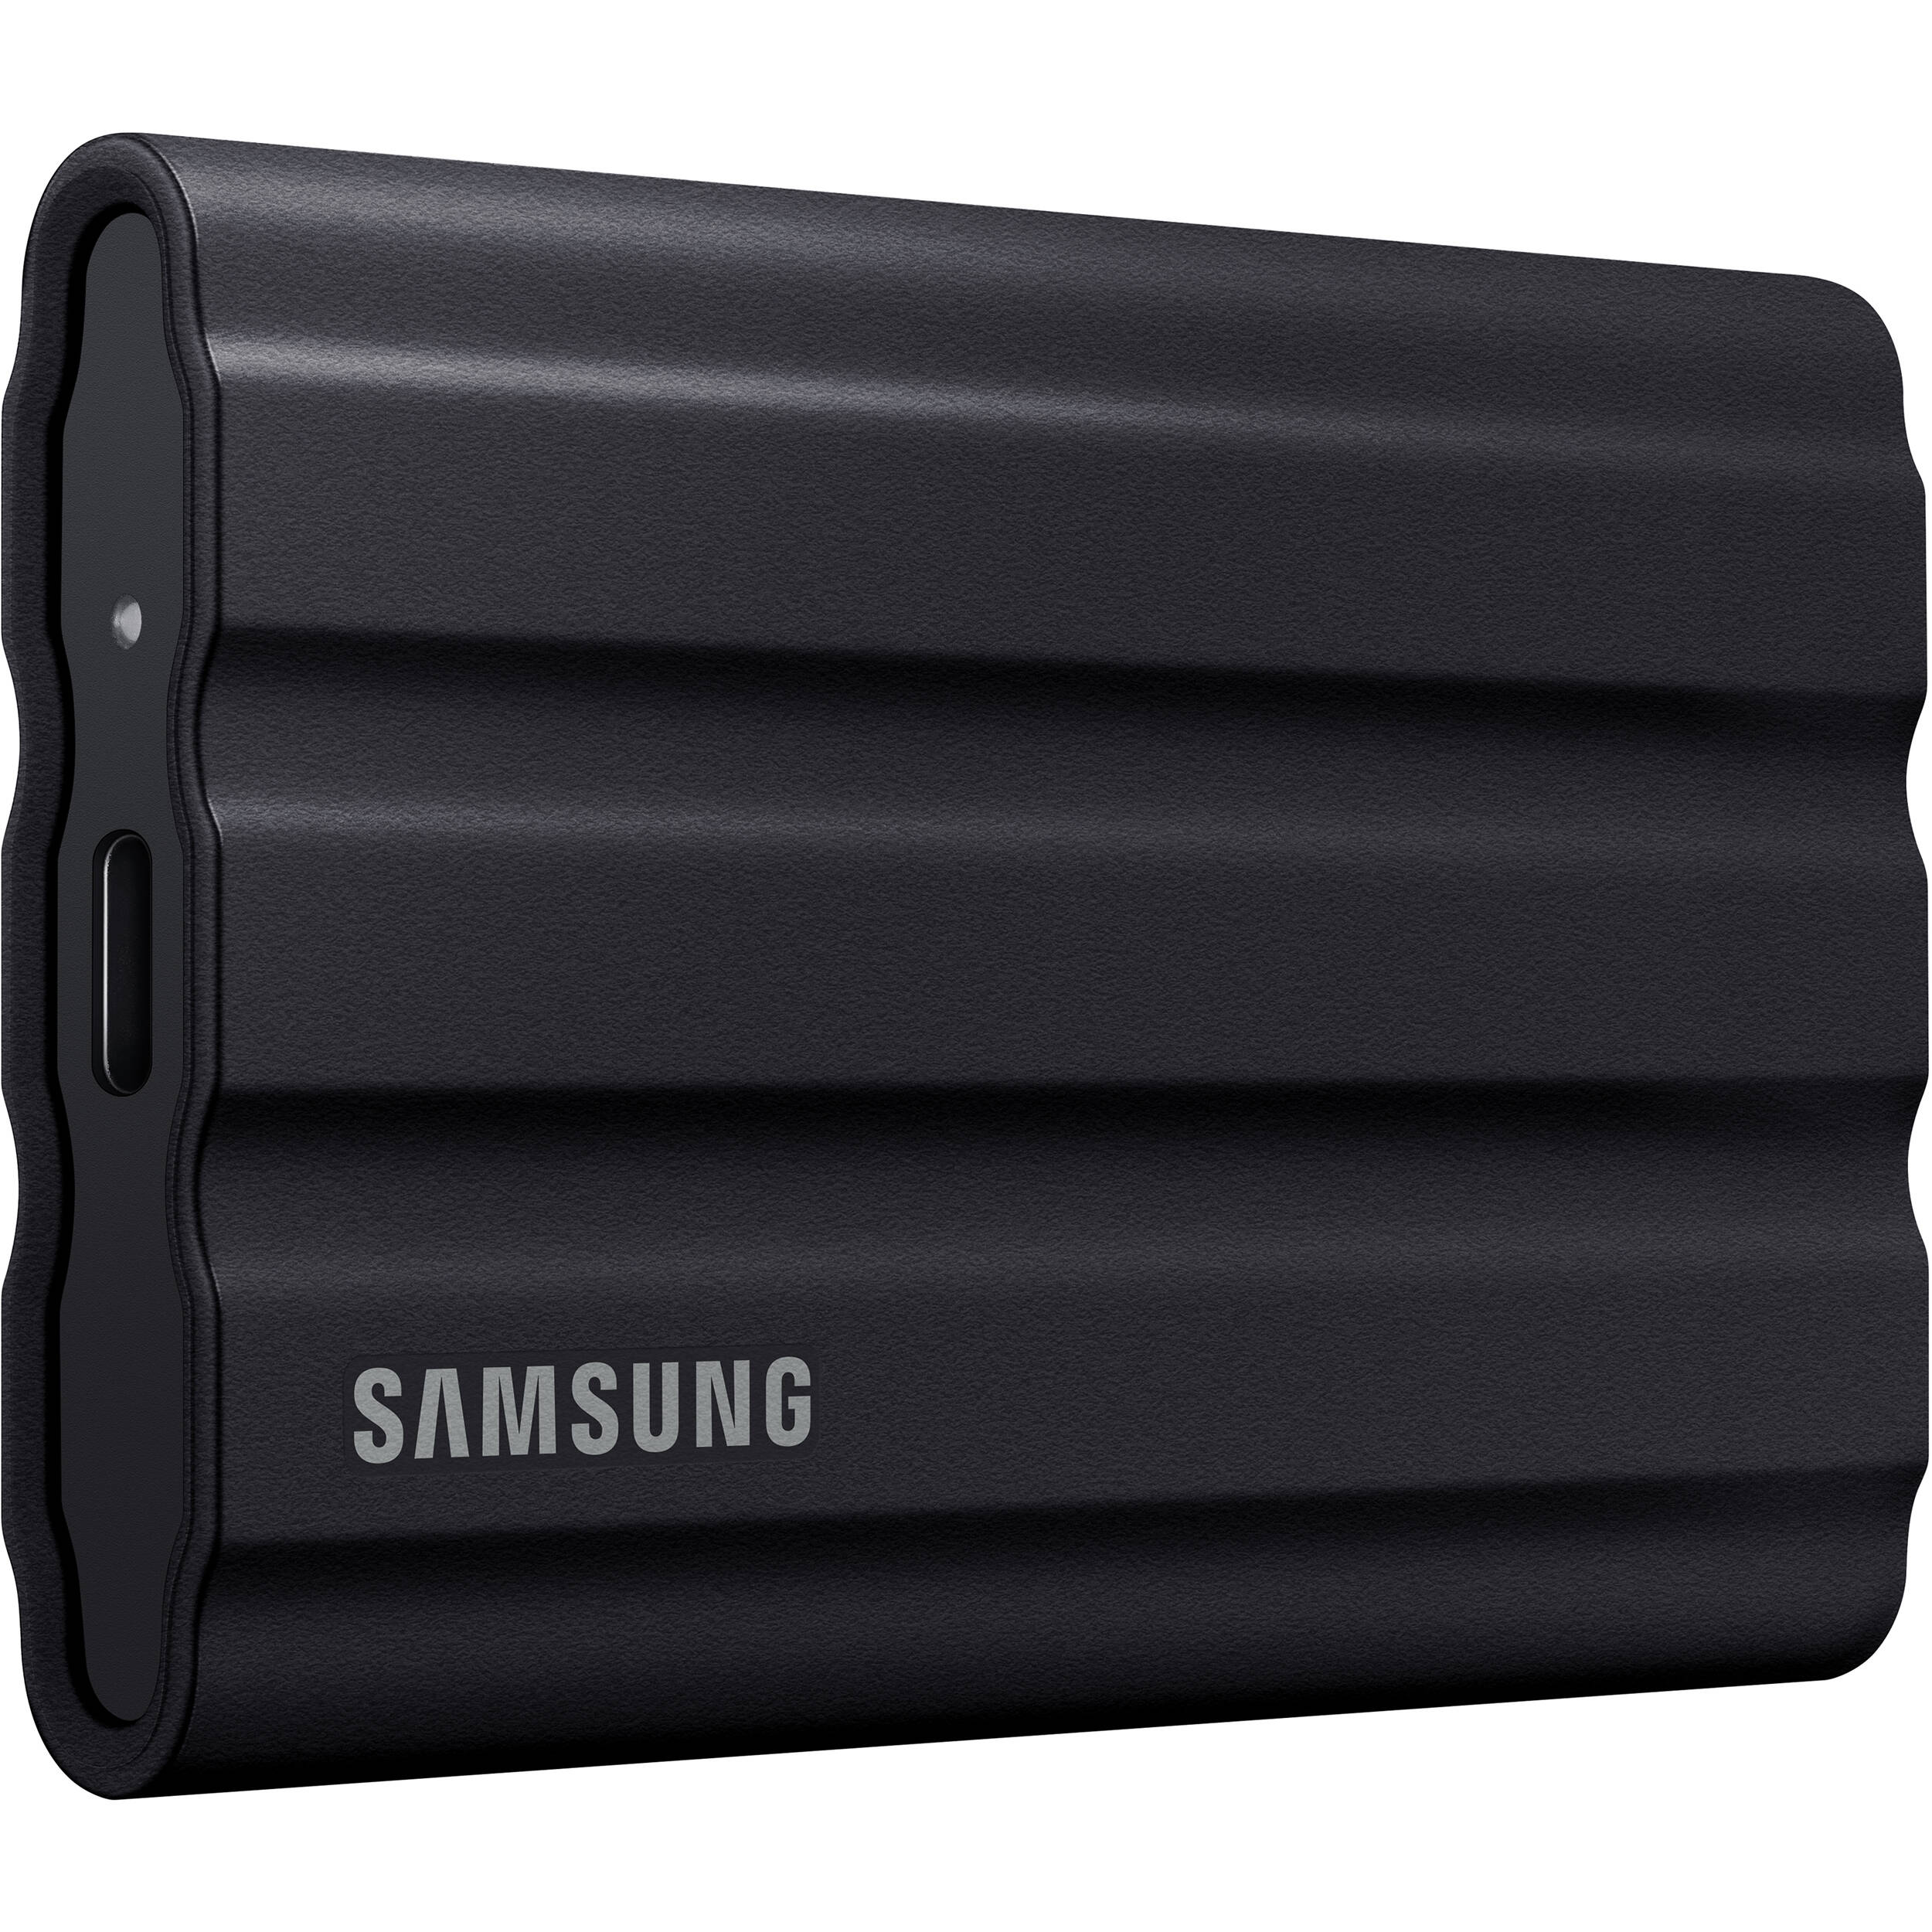 https://tuanphong.vn/pictures/full/2022/05/1653037088-552-portable-ssd-samsung-t7-shield-black-1tb-1.jpg